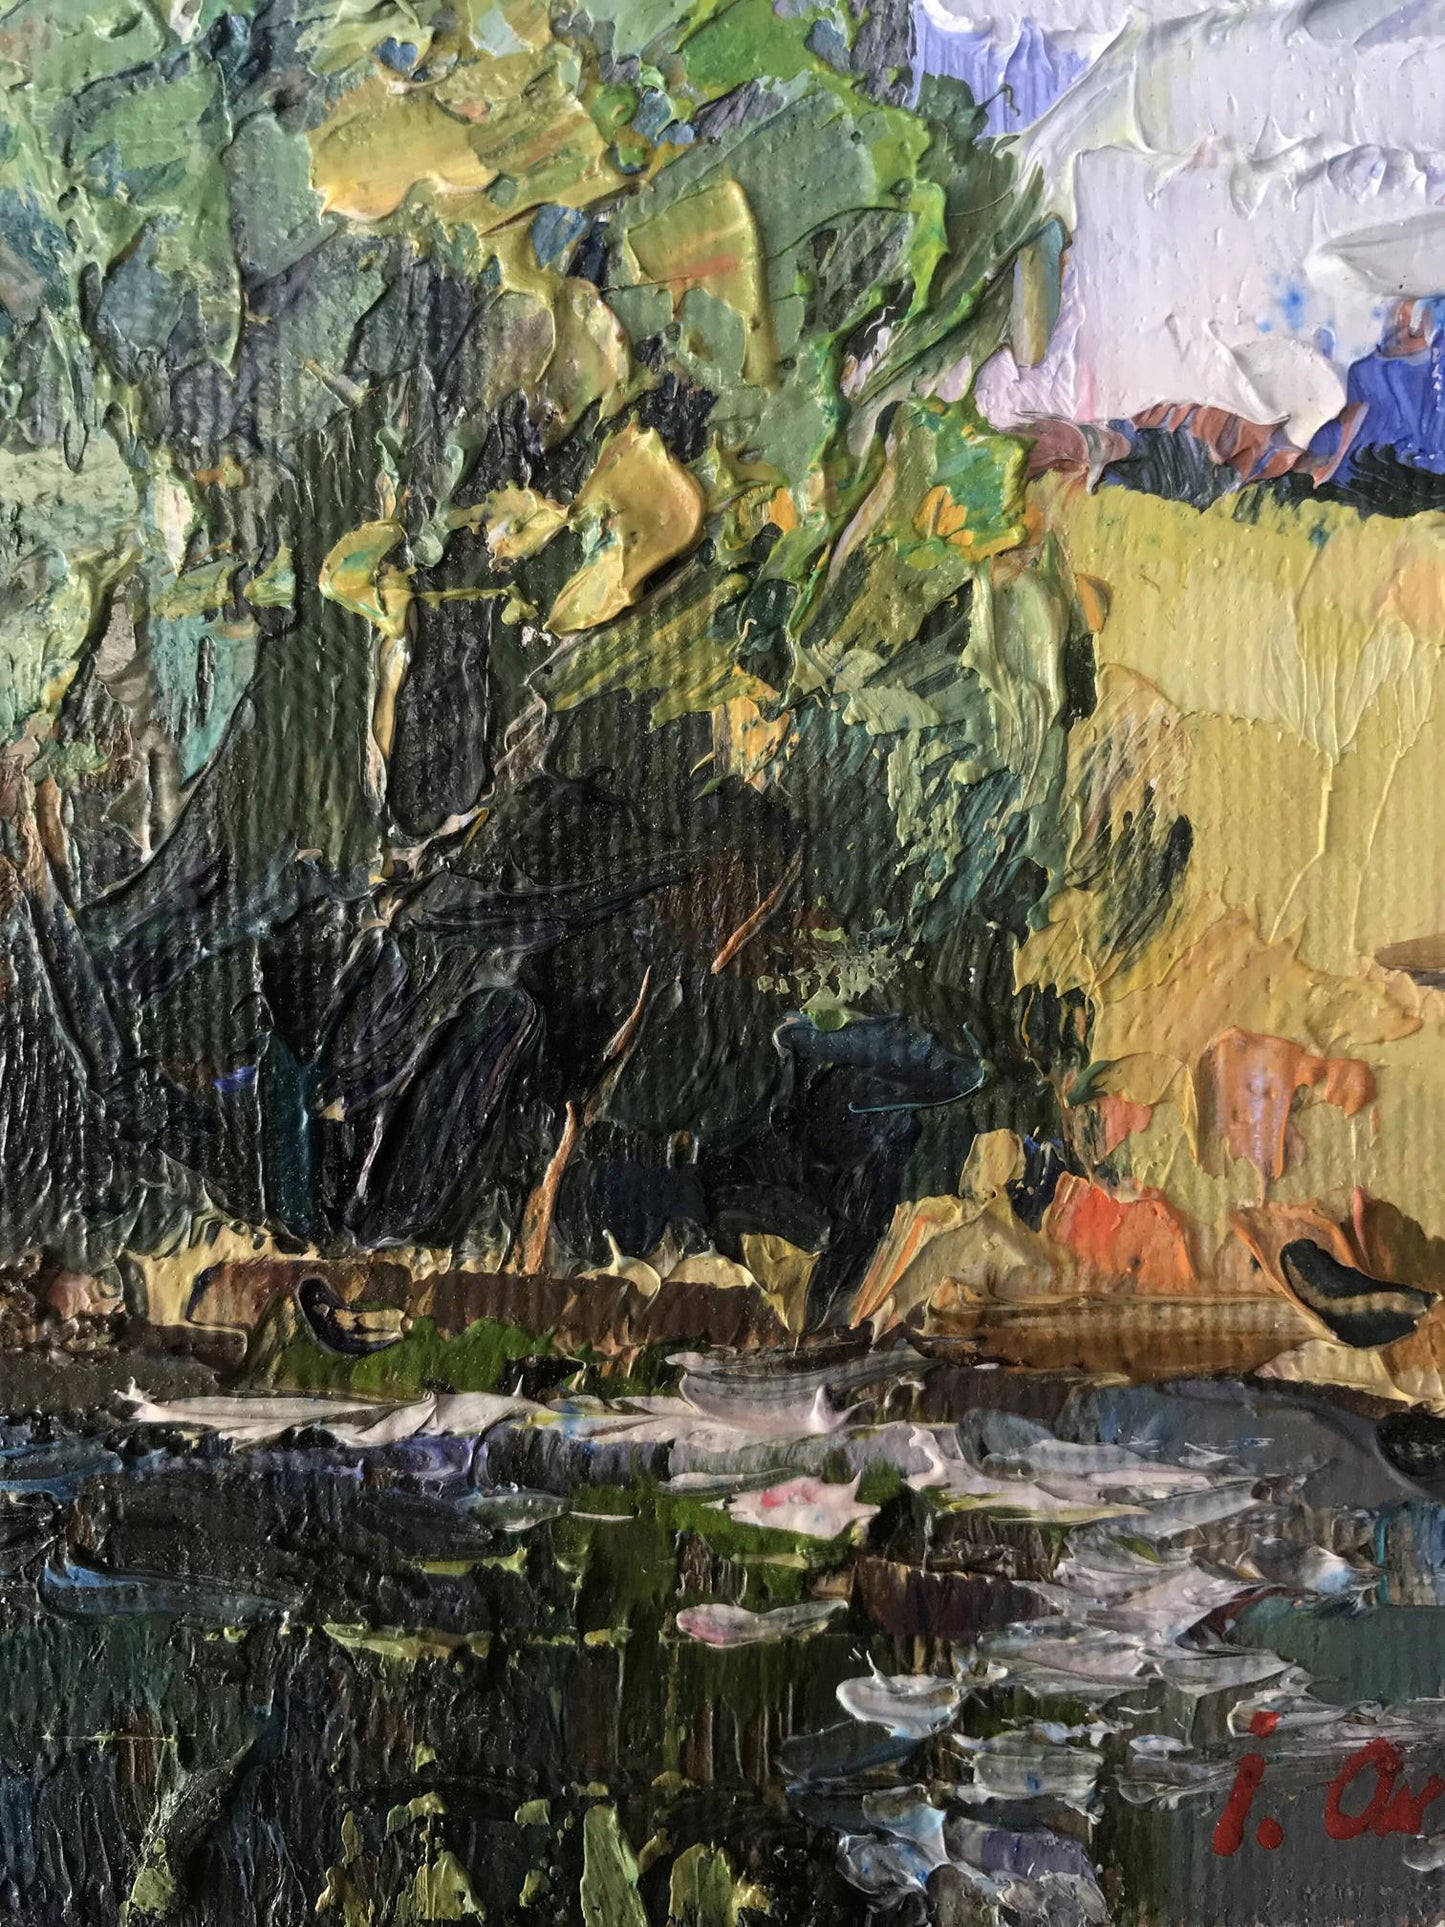 Oksana Ivanyuk's oil painting captures a secluded forest lake